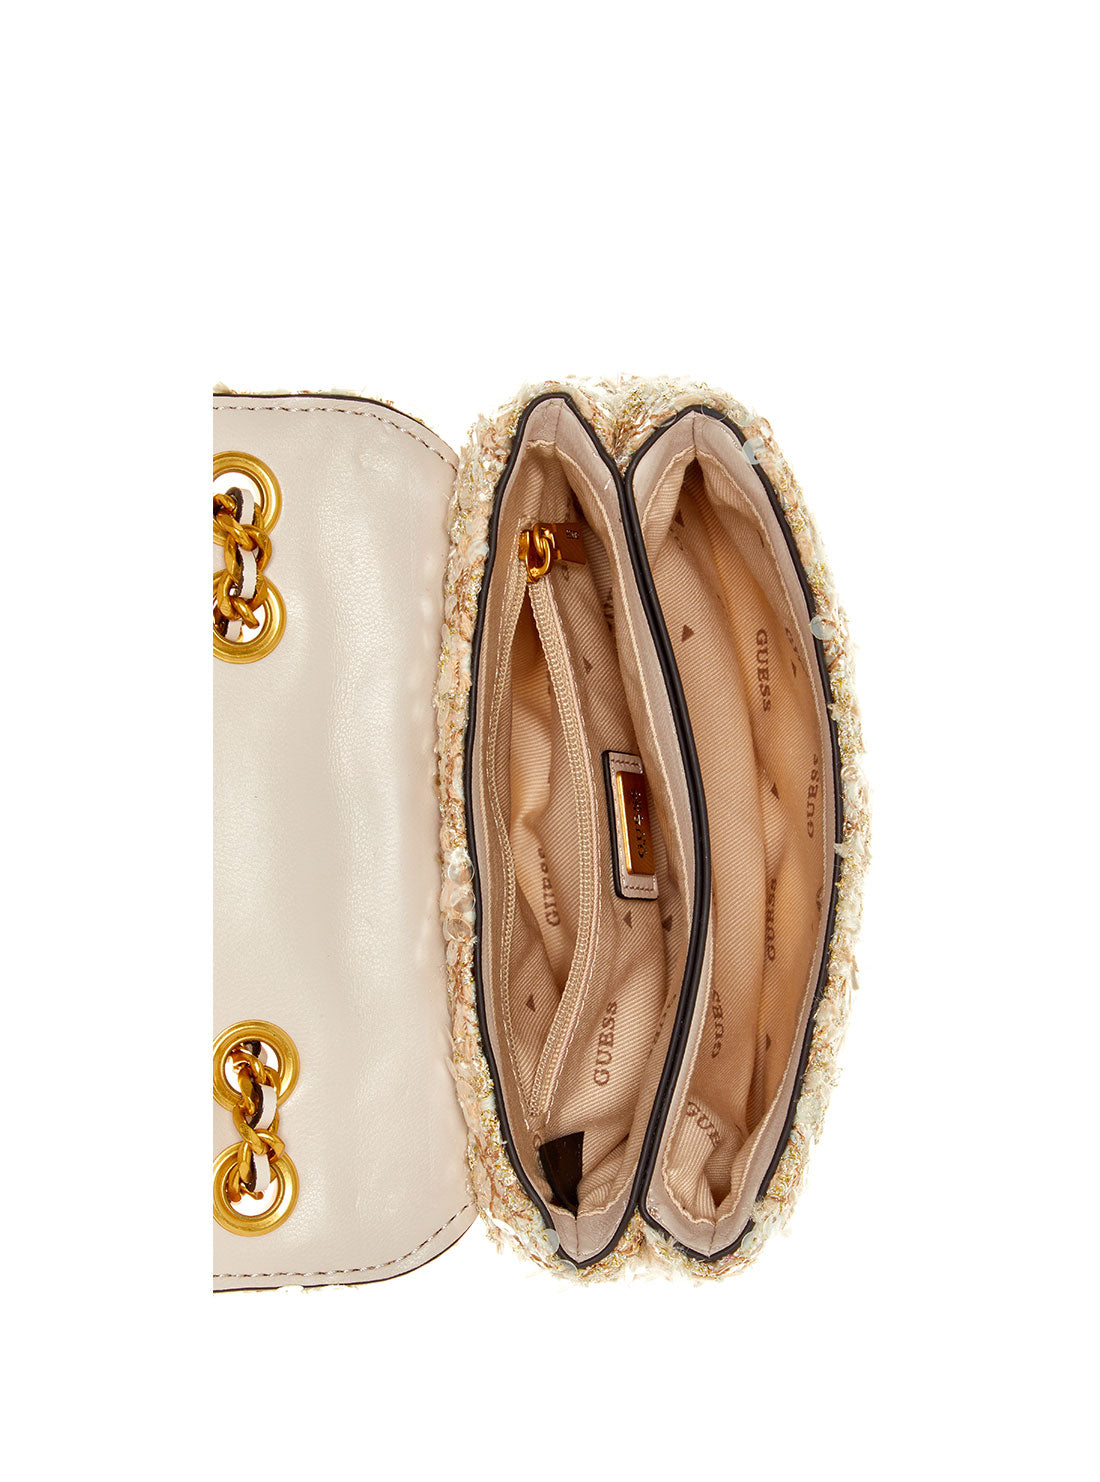 GUESS Gold Giully Mini Crossbody Bag inside view